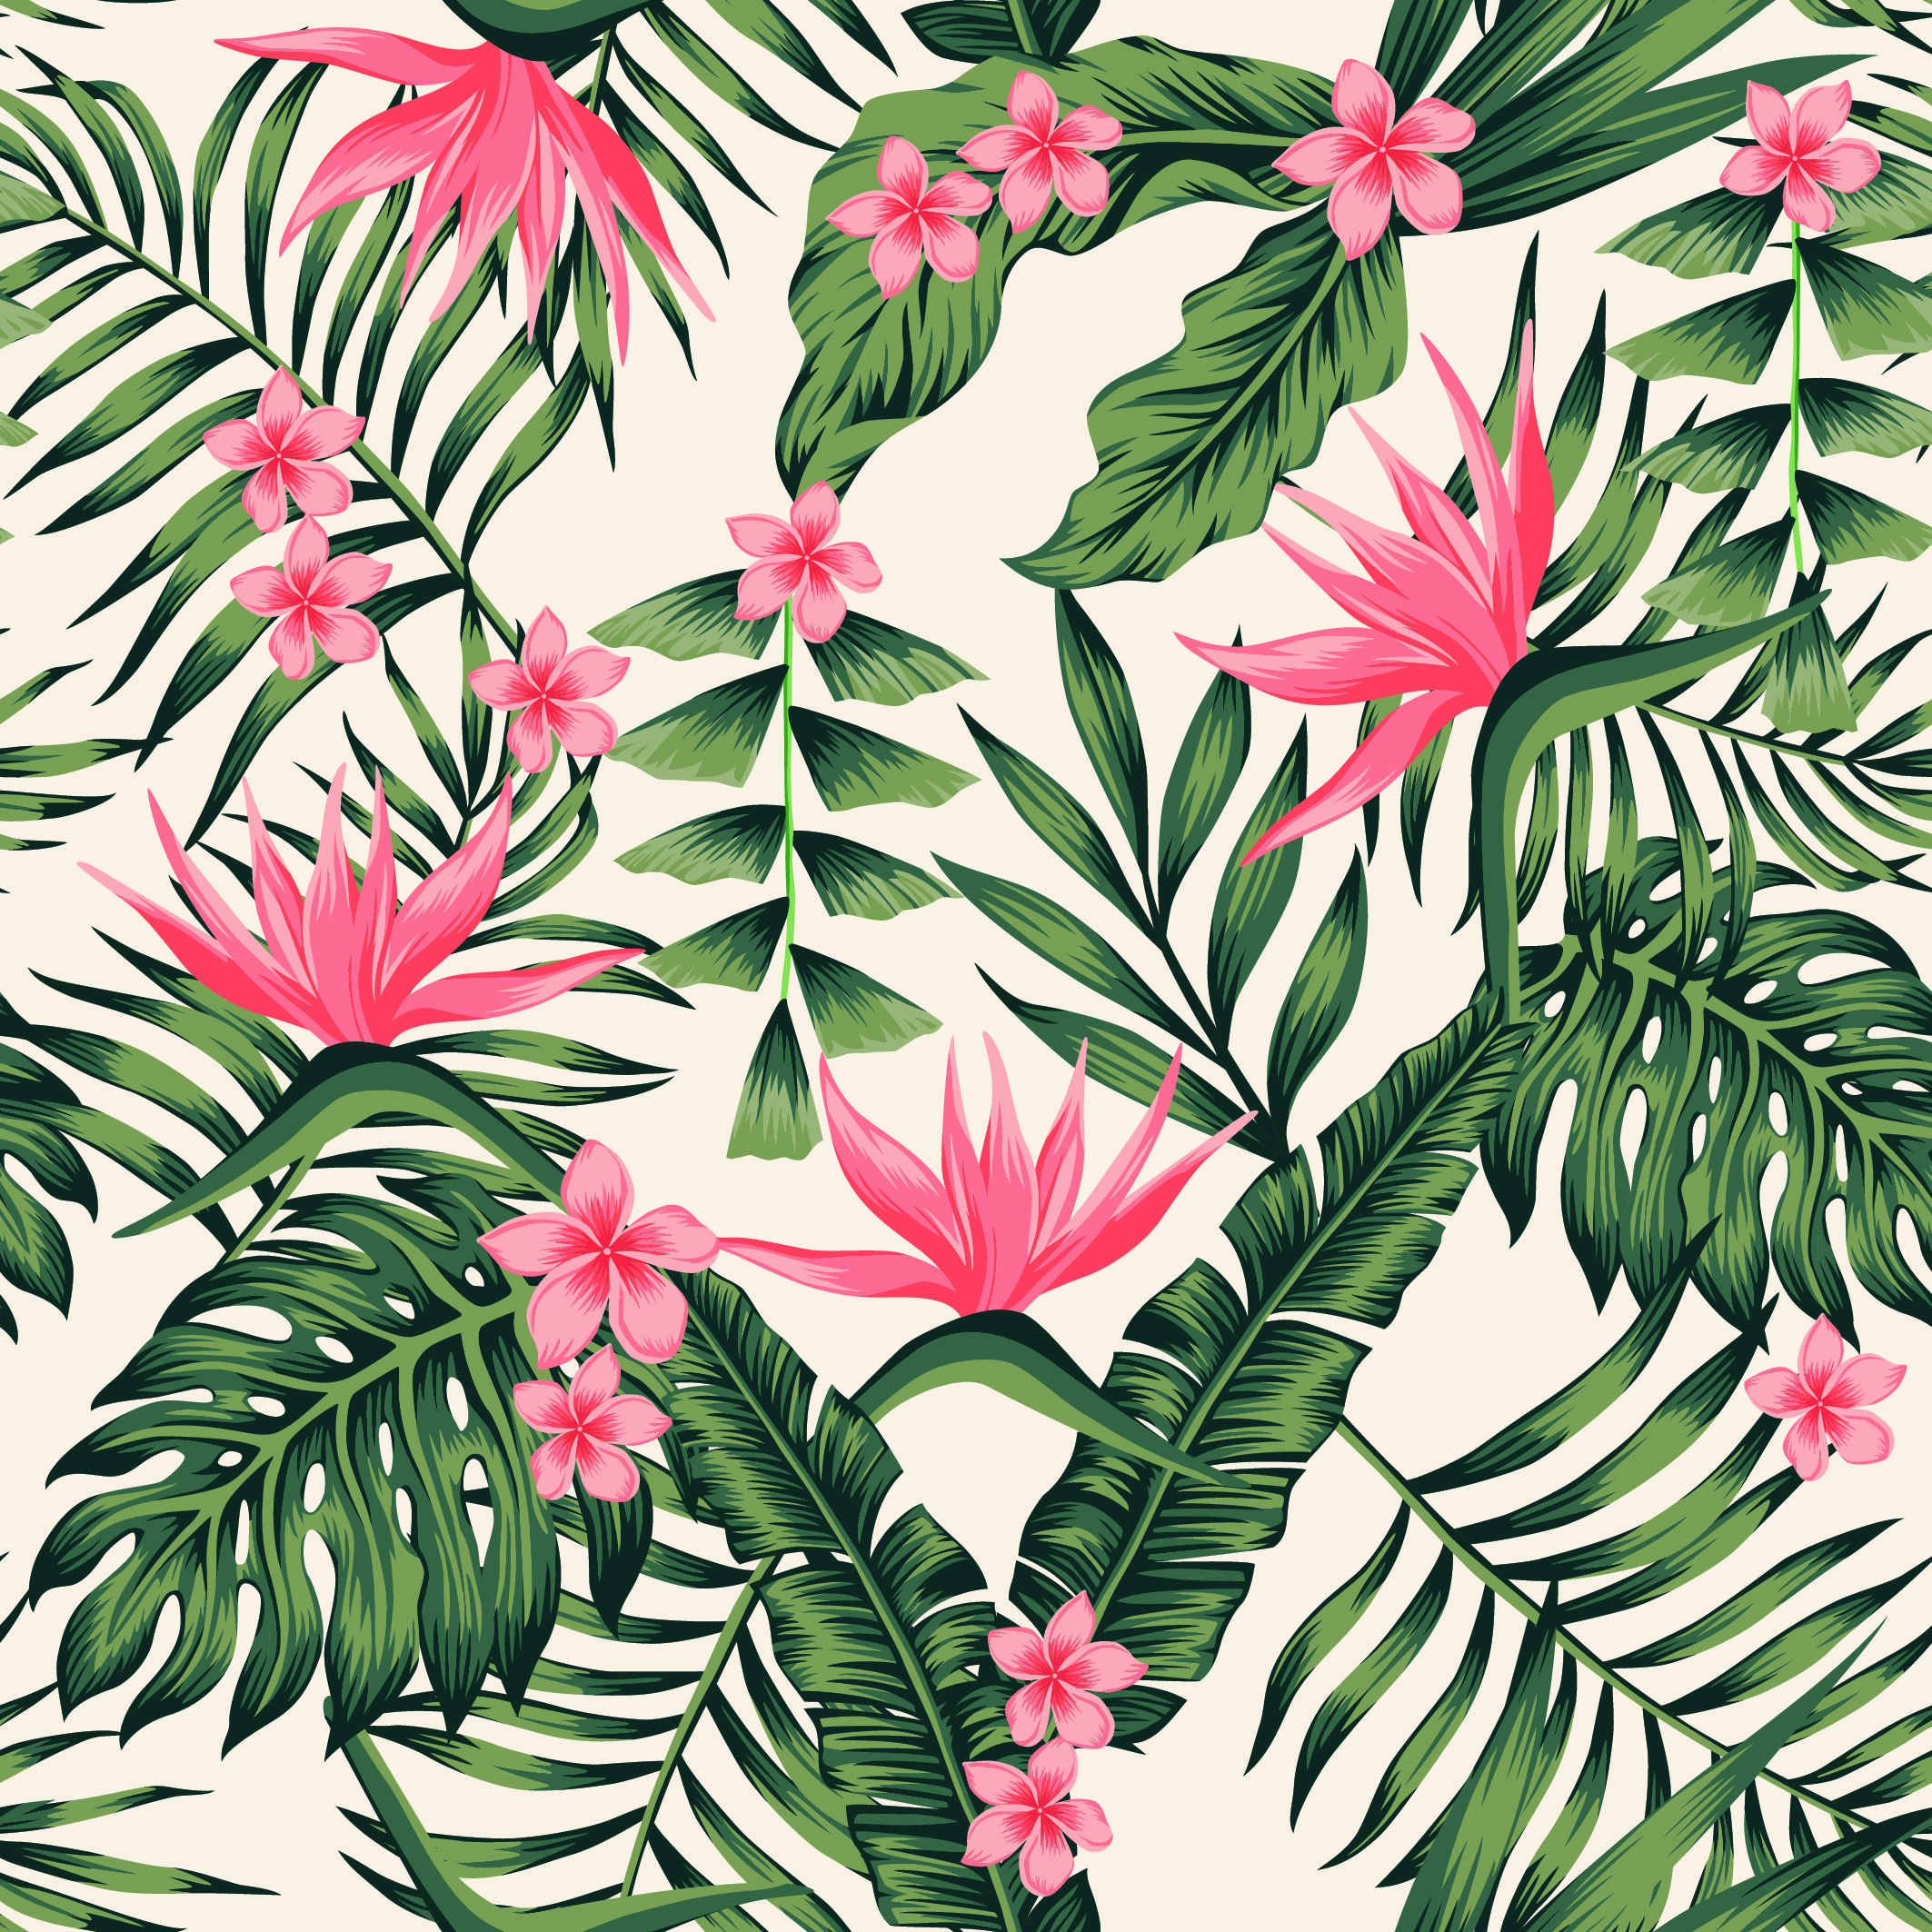 General 2126x2126 abstract flowers vector palm trees jungle leaves pattern